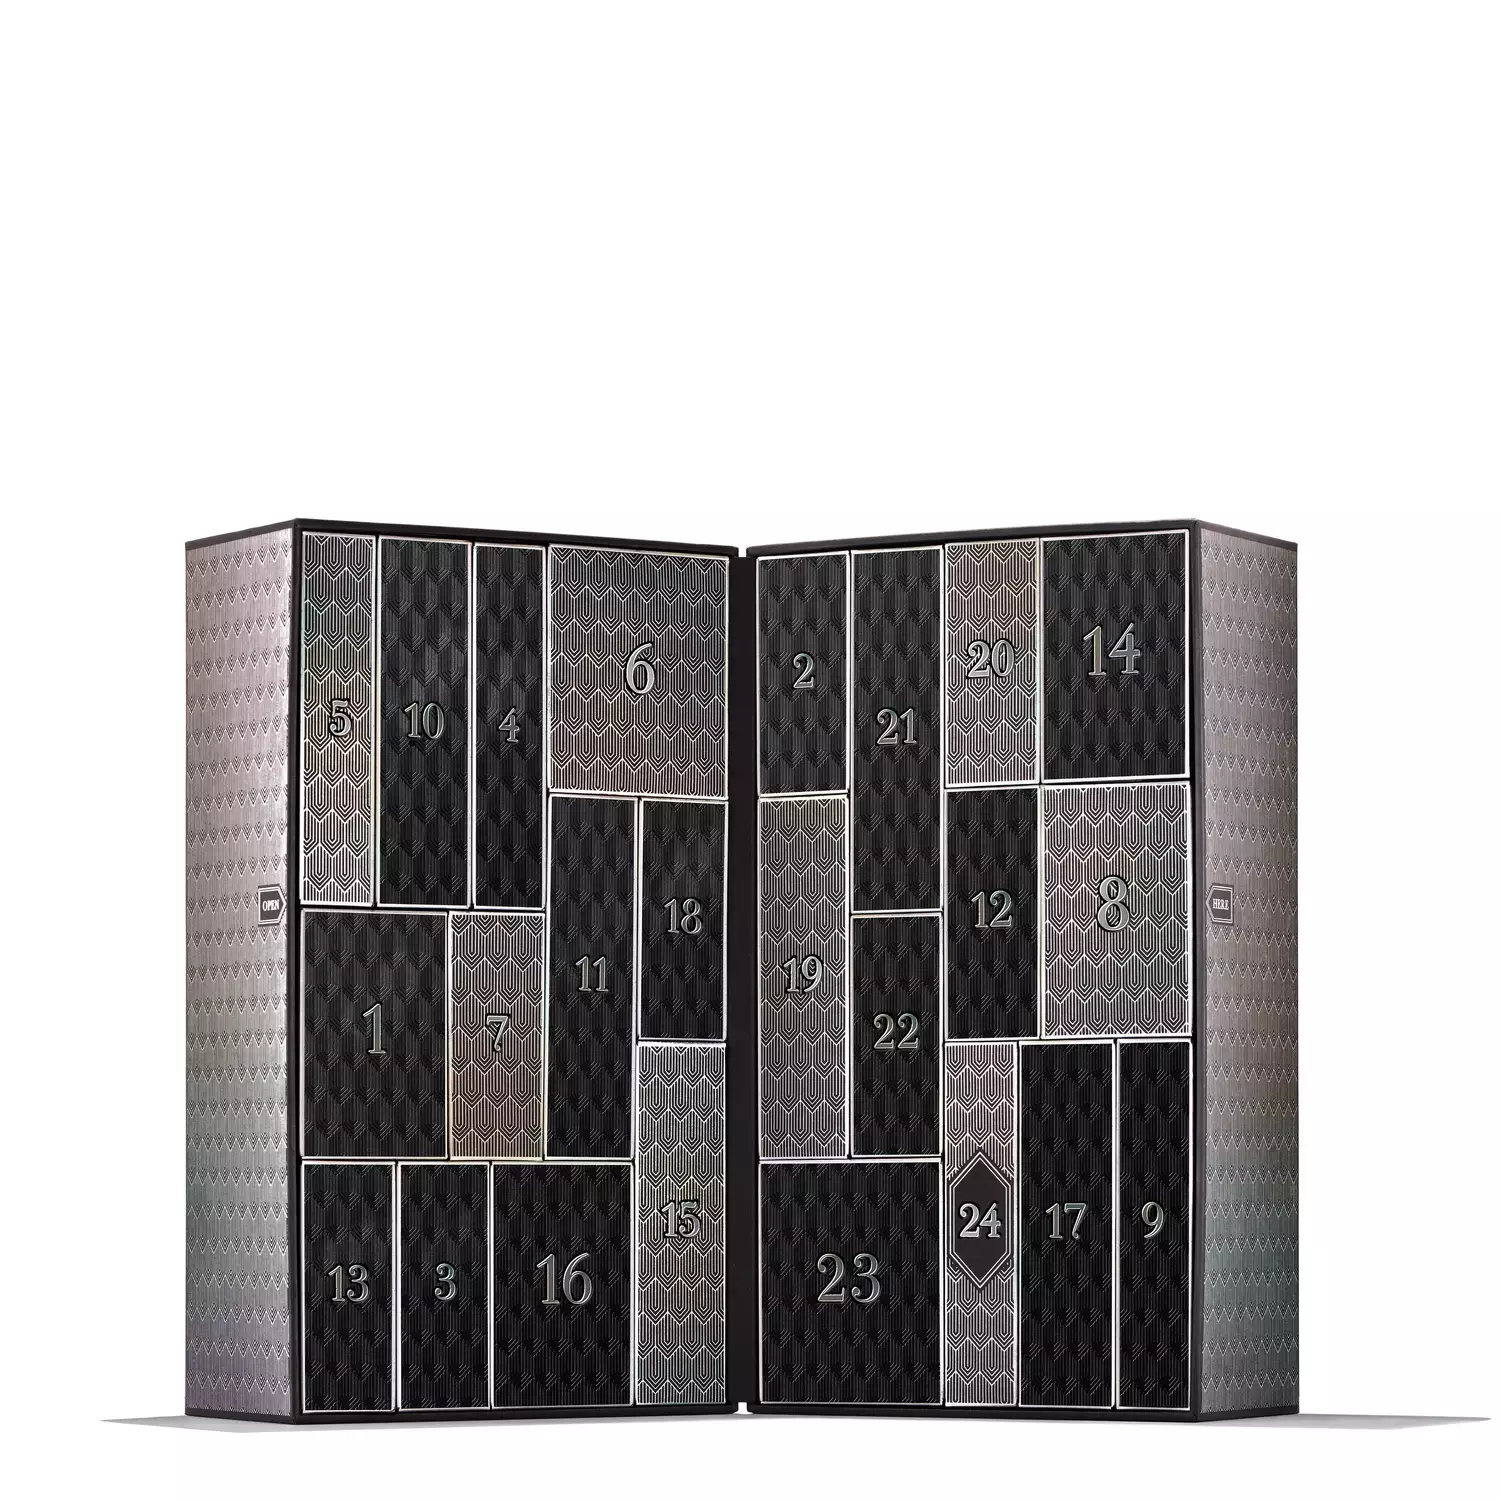 Molton Brown Luxury Advent Calendar 2020 Available Now + Full Spoilers! -  Hello Subscription